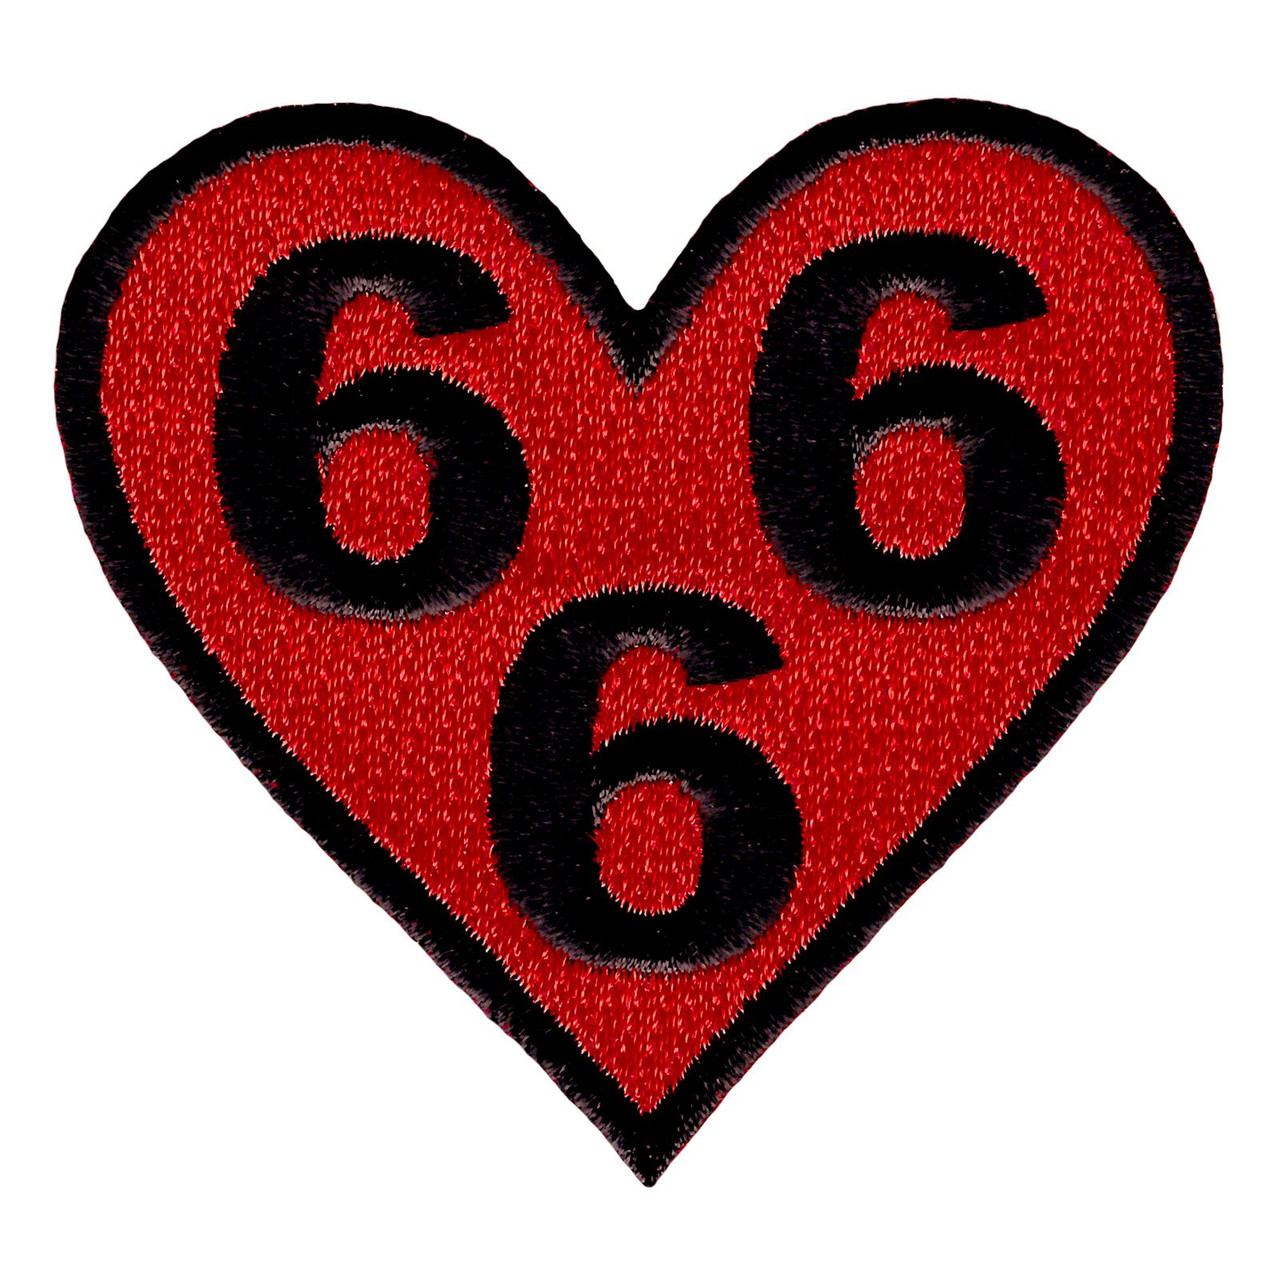 666 Heart Embroidered Patch